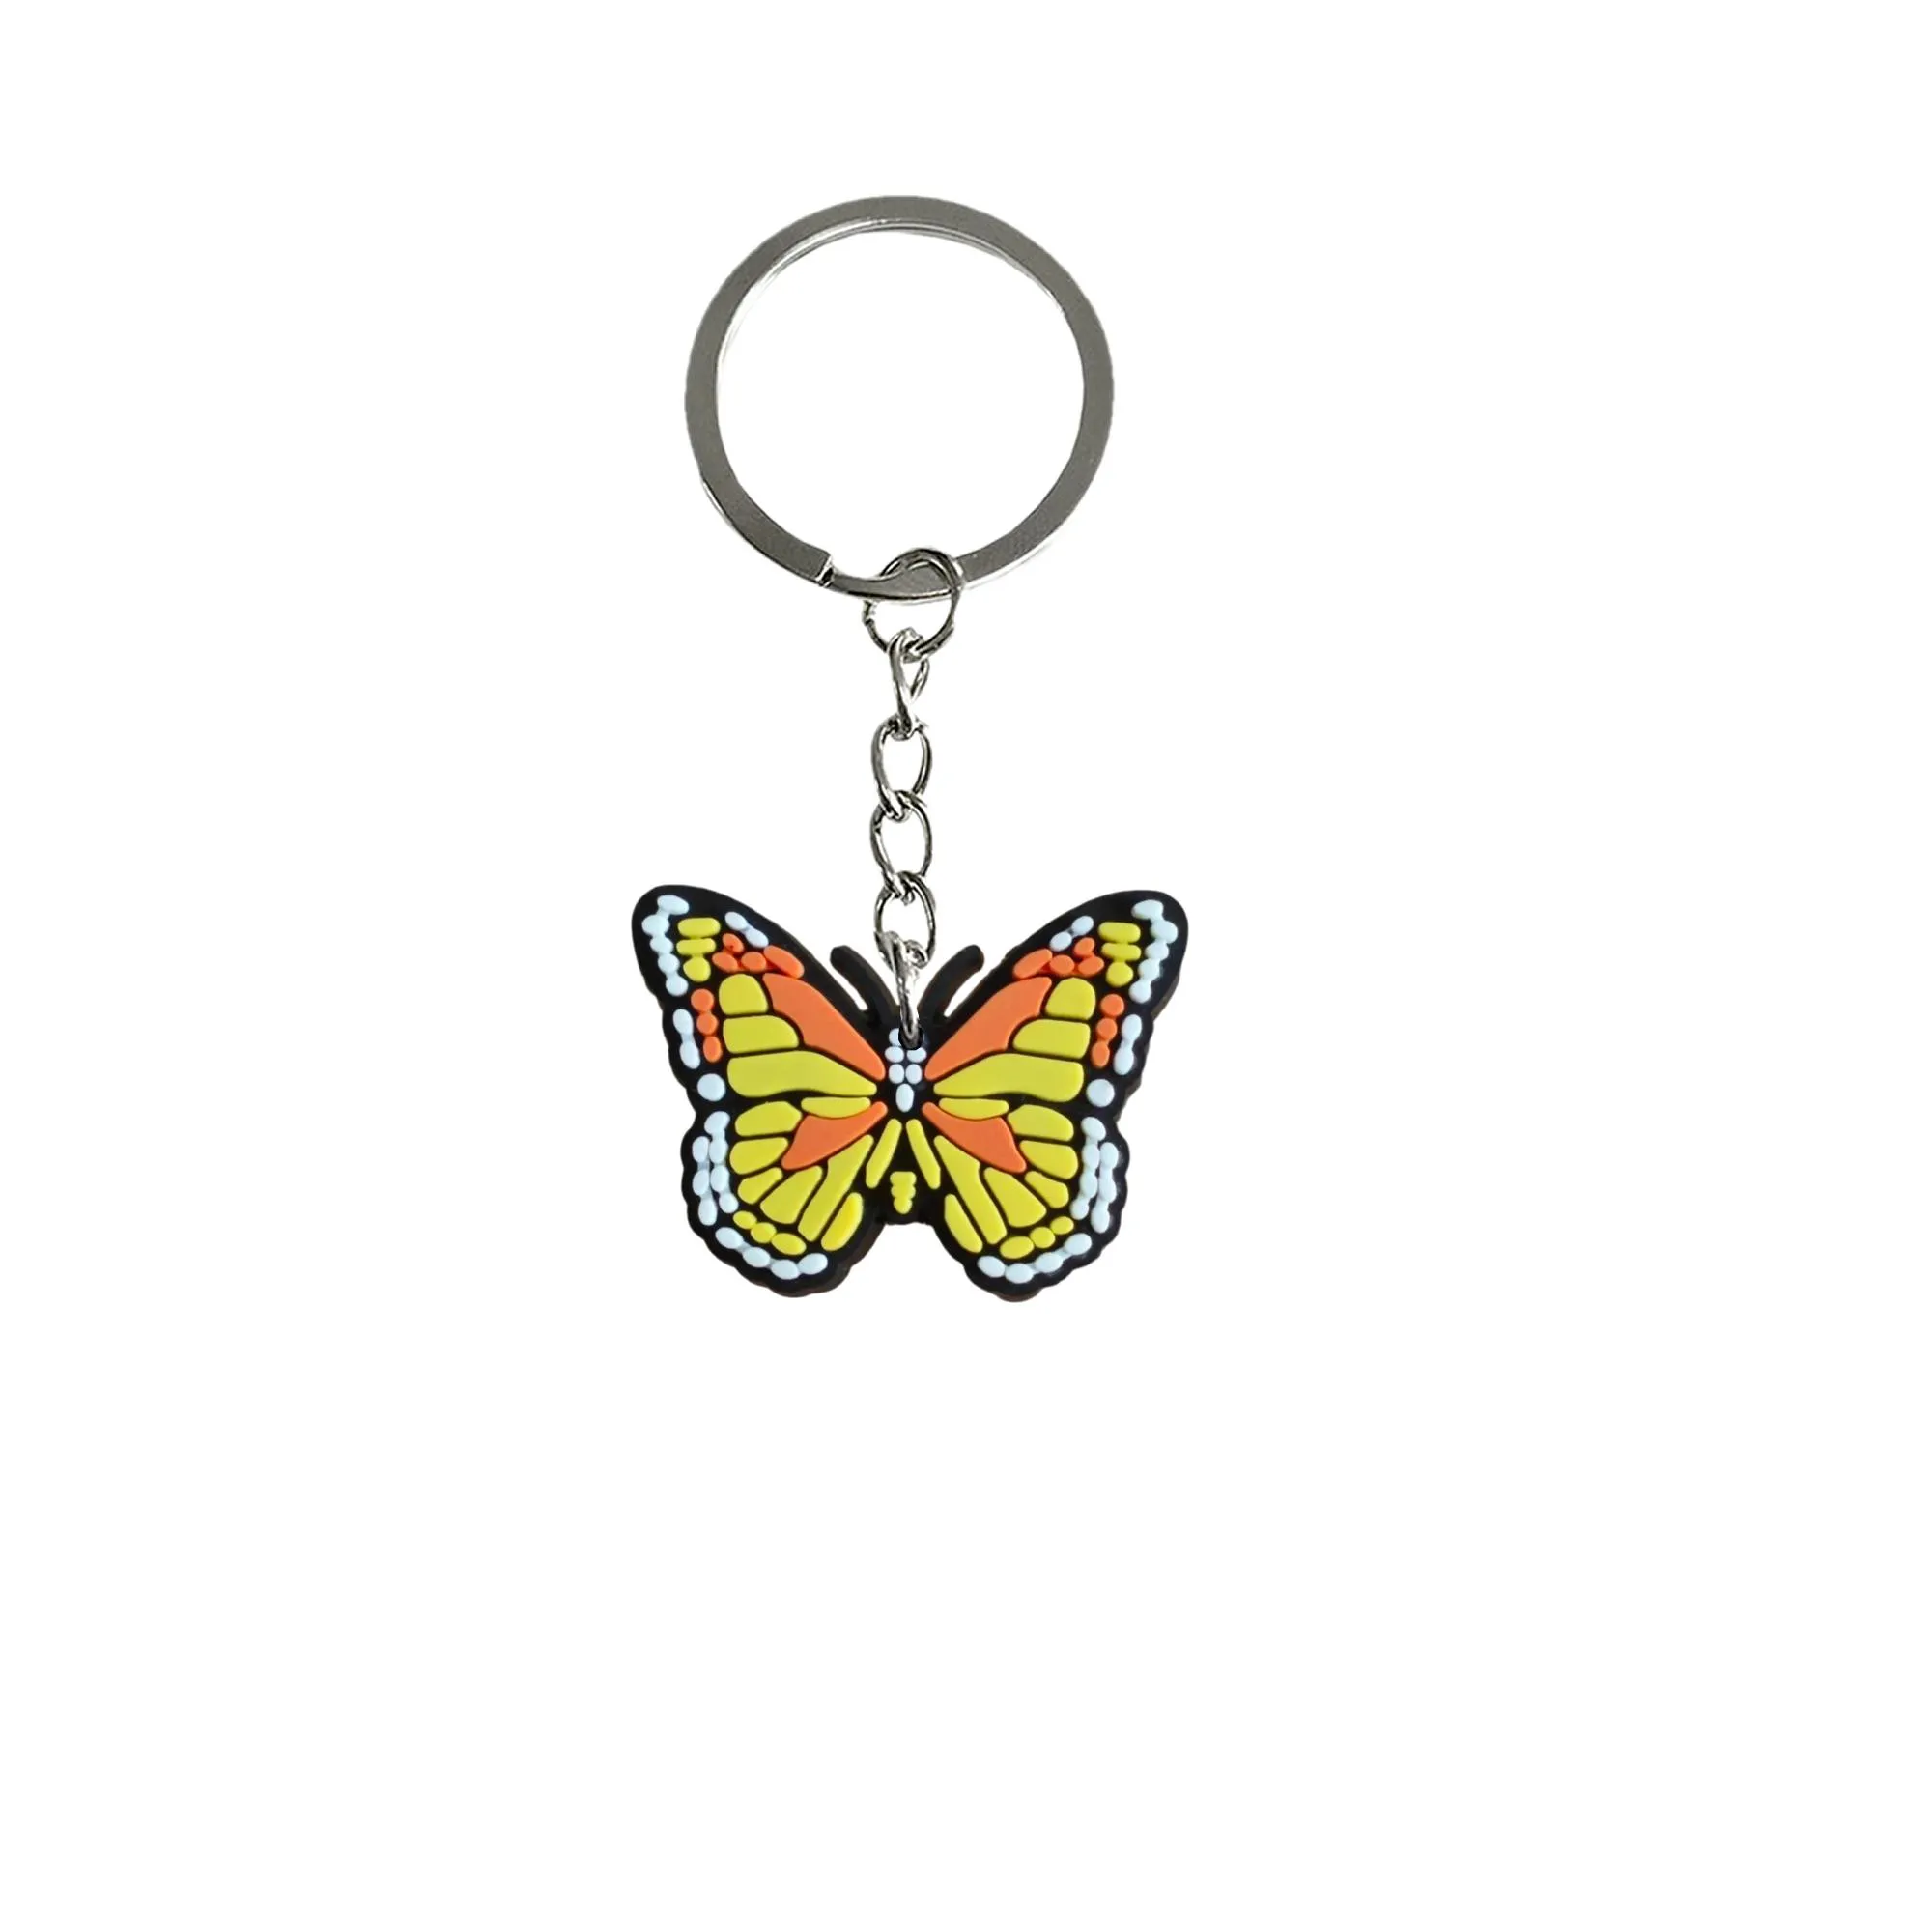 colored butterfly 28 keychain pendants accessories for kids birthday party favors boys keychains key ring men keyring suitable schoolbag tags goodie bag stuffer christmas gifts and holiday charms school day supplies gift chain fans